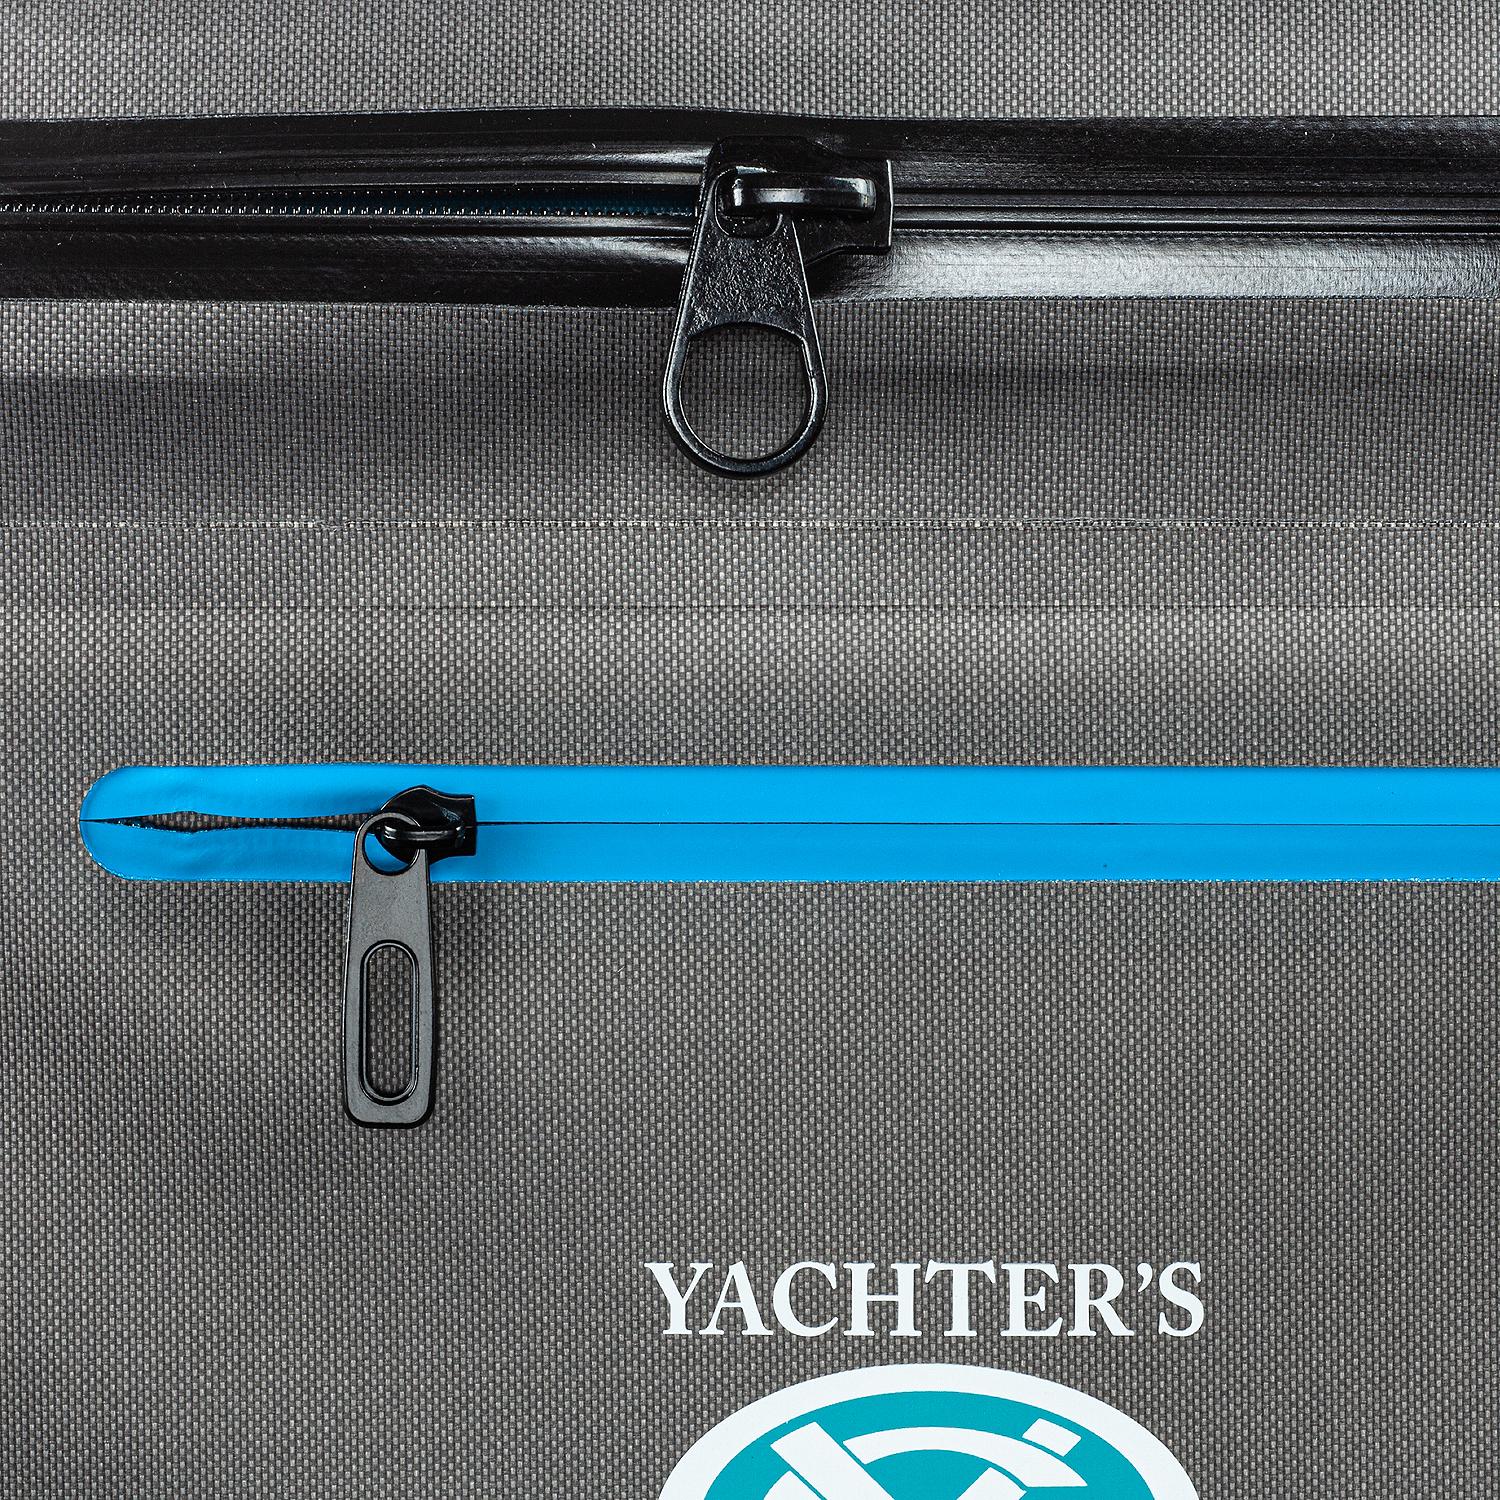 yachter's choice soft cooler